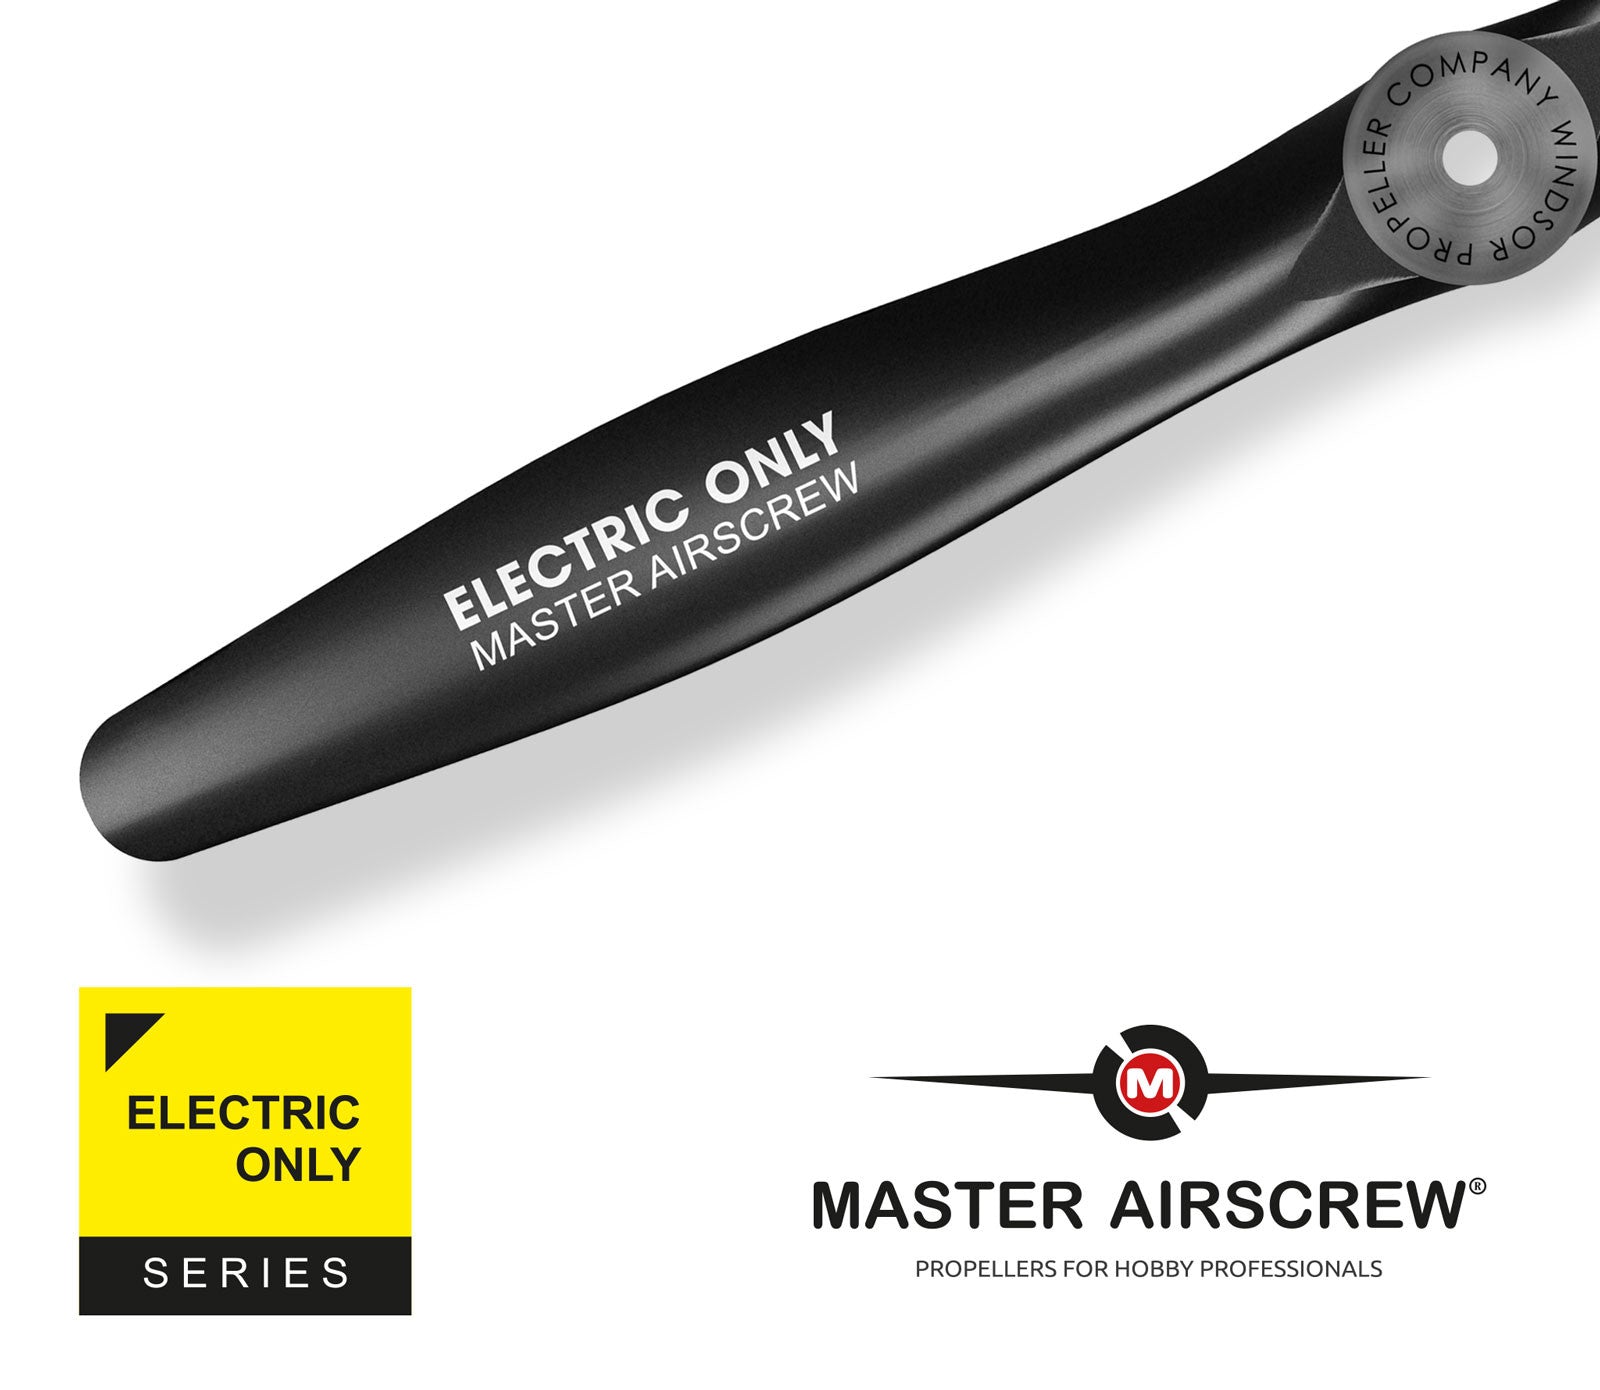 Electric Only - 10x7 Propeller - Master Airscrew